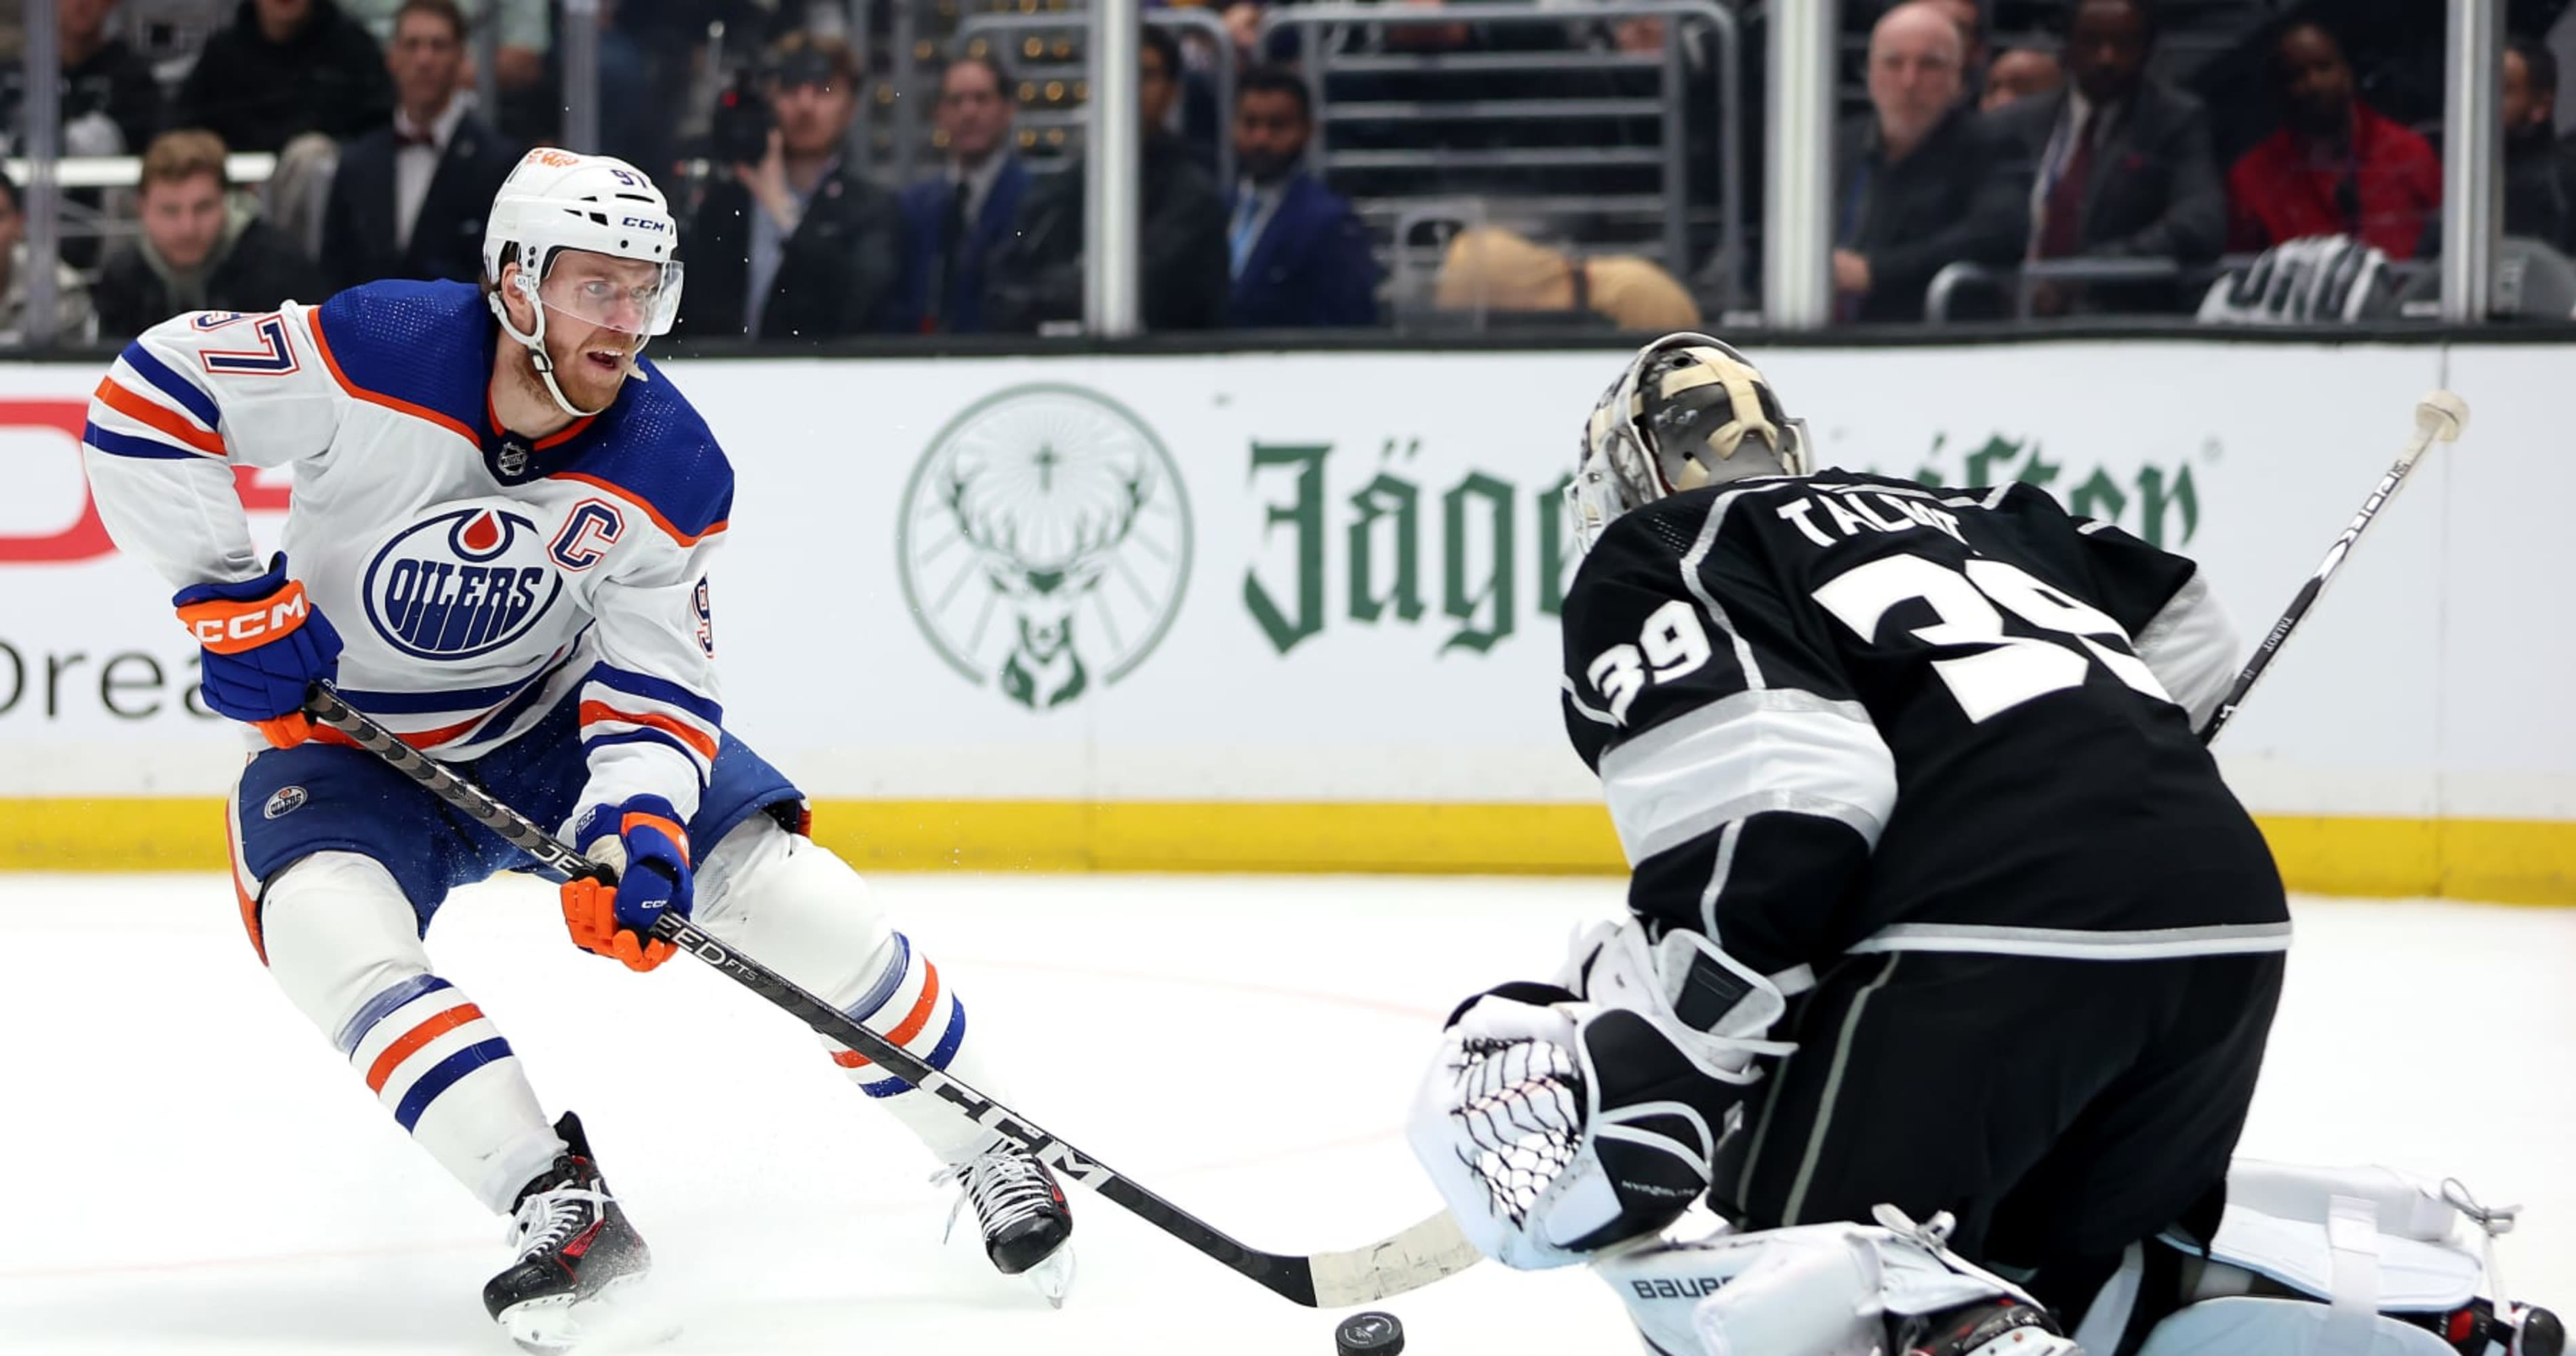 Kings Eliminated by Oilers as NHL Fans Hail Connor McDavid, Leon Draisaitl Dominance